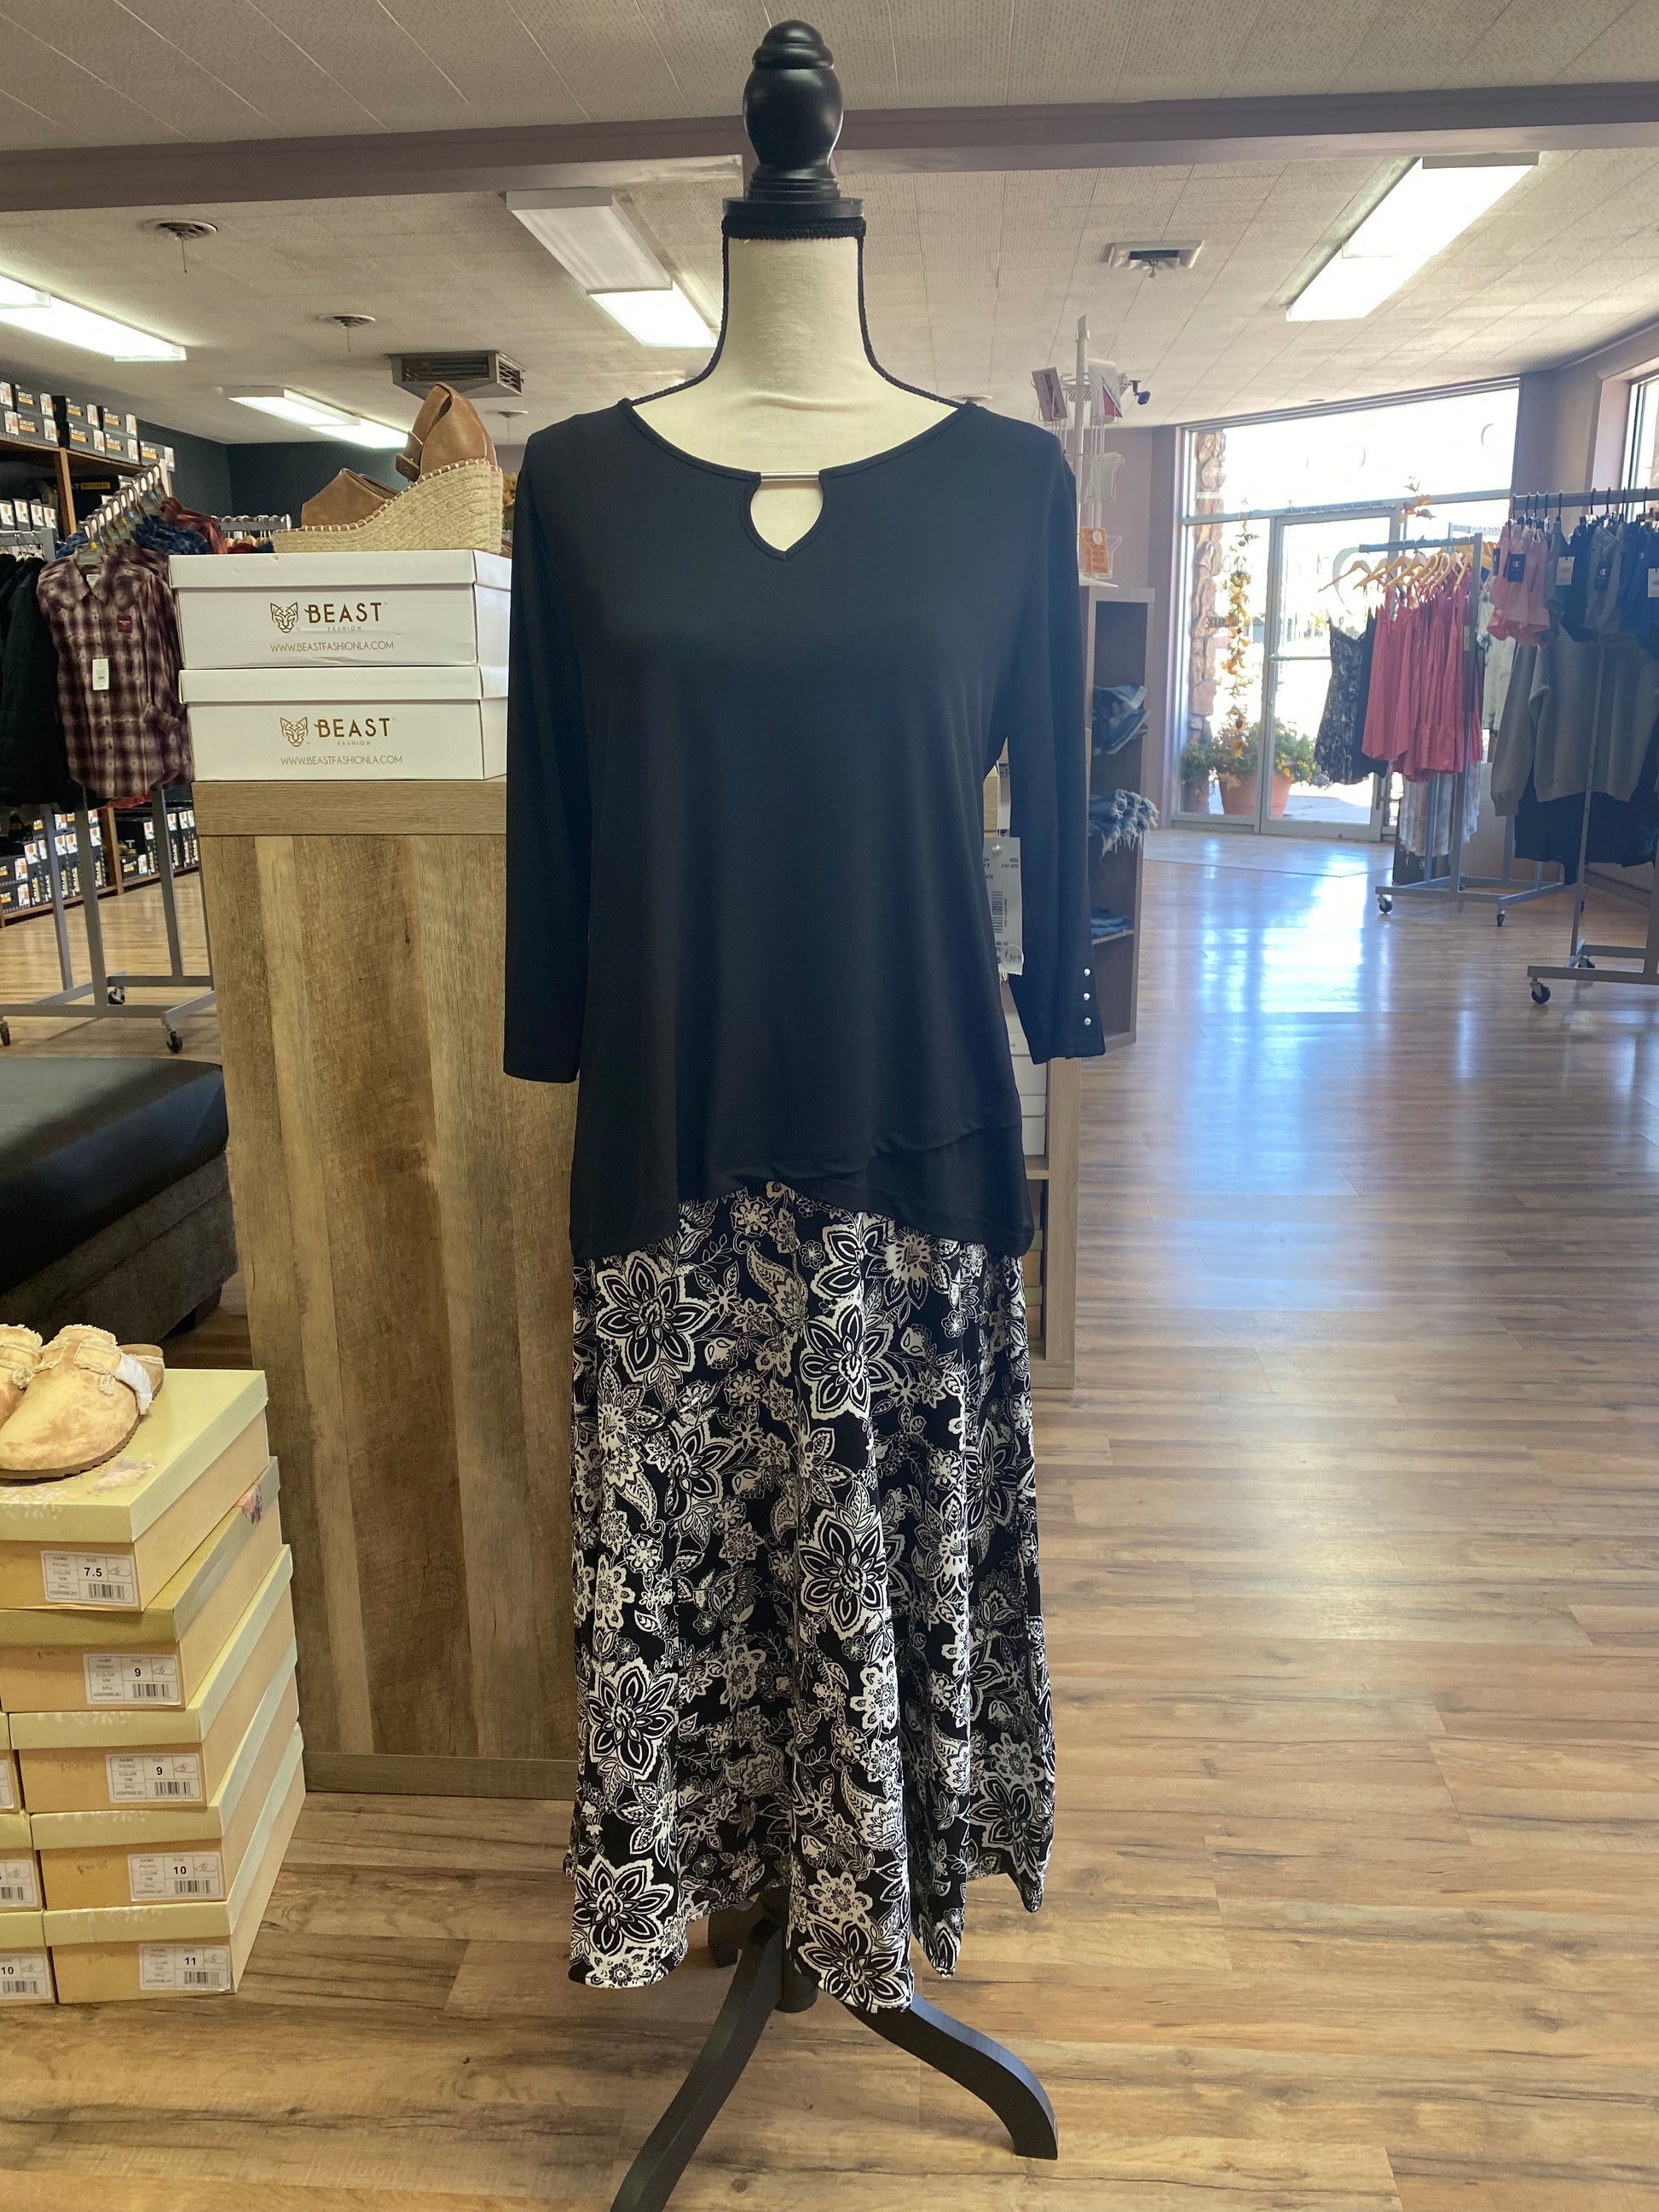 Southern Lady Black 3/4 Sleeve Top - Whitt & Co. Clothing